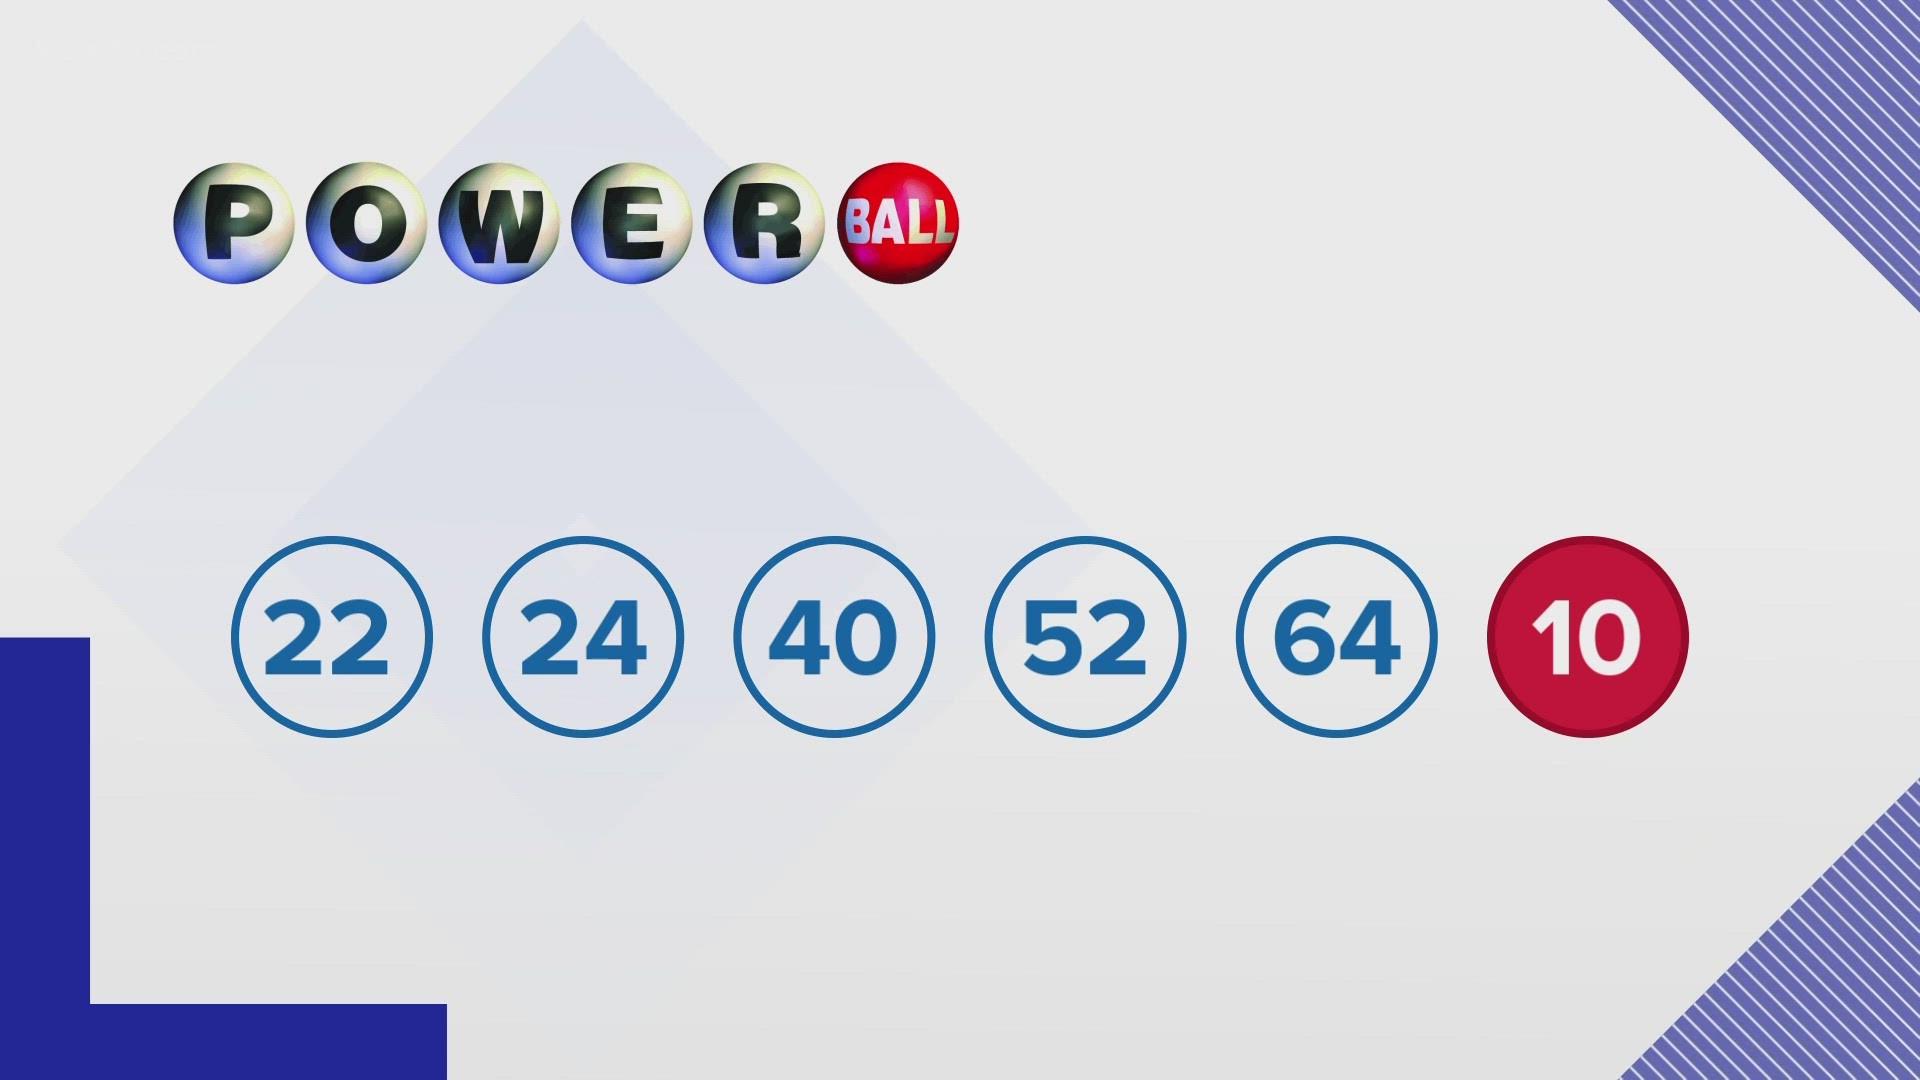 The $1.76 billion is the second-largest Powerball jackpot and U.S. lottery jackpot ever won, according to Powerball.